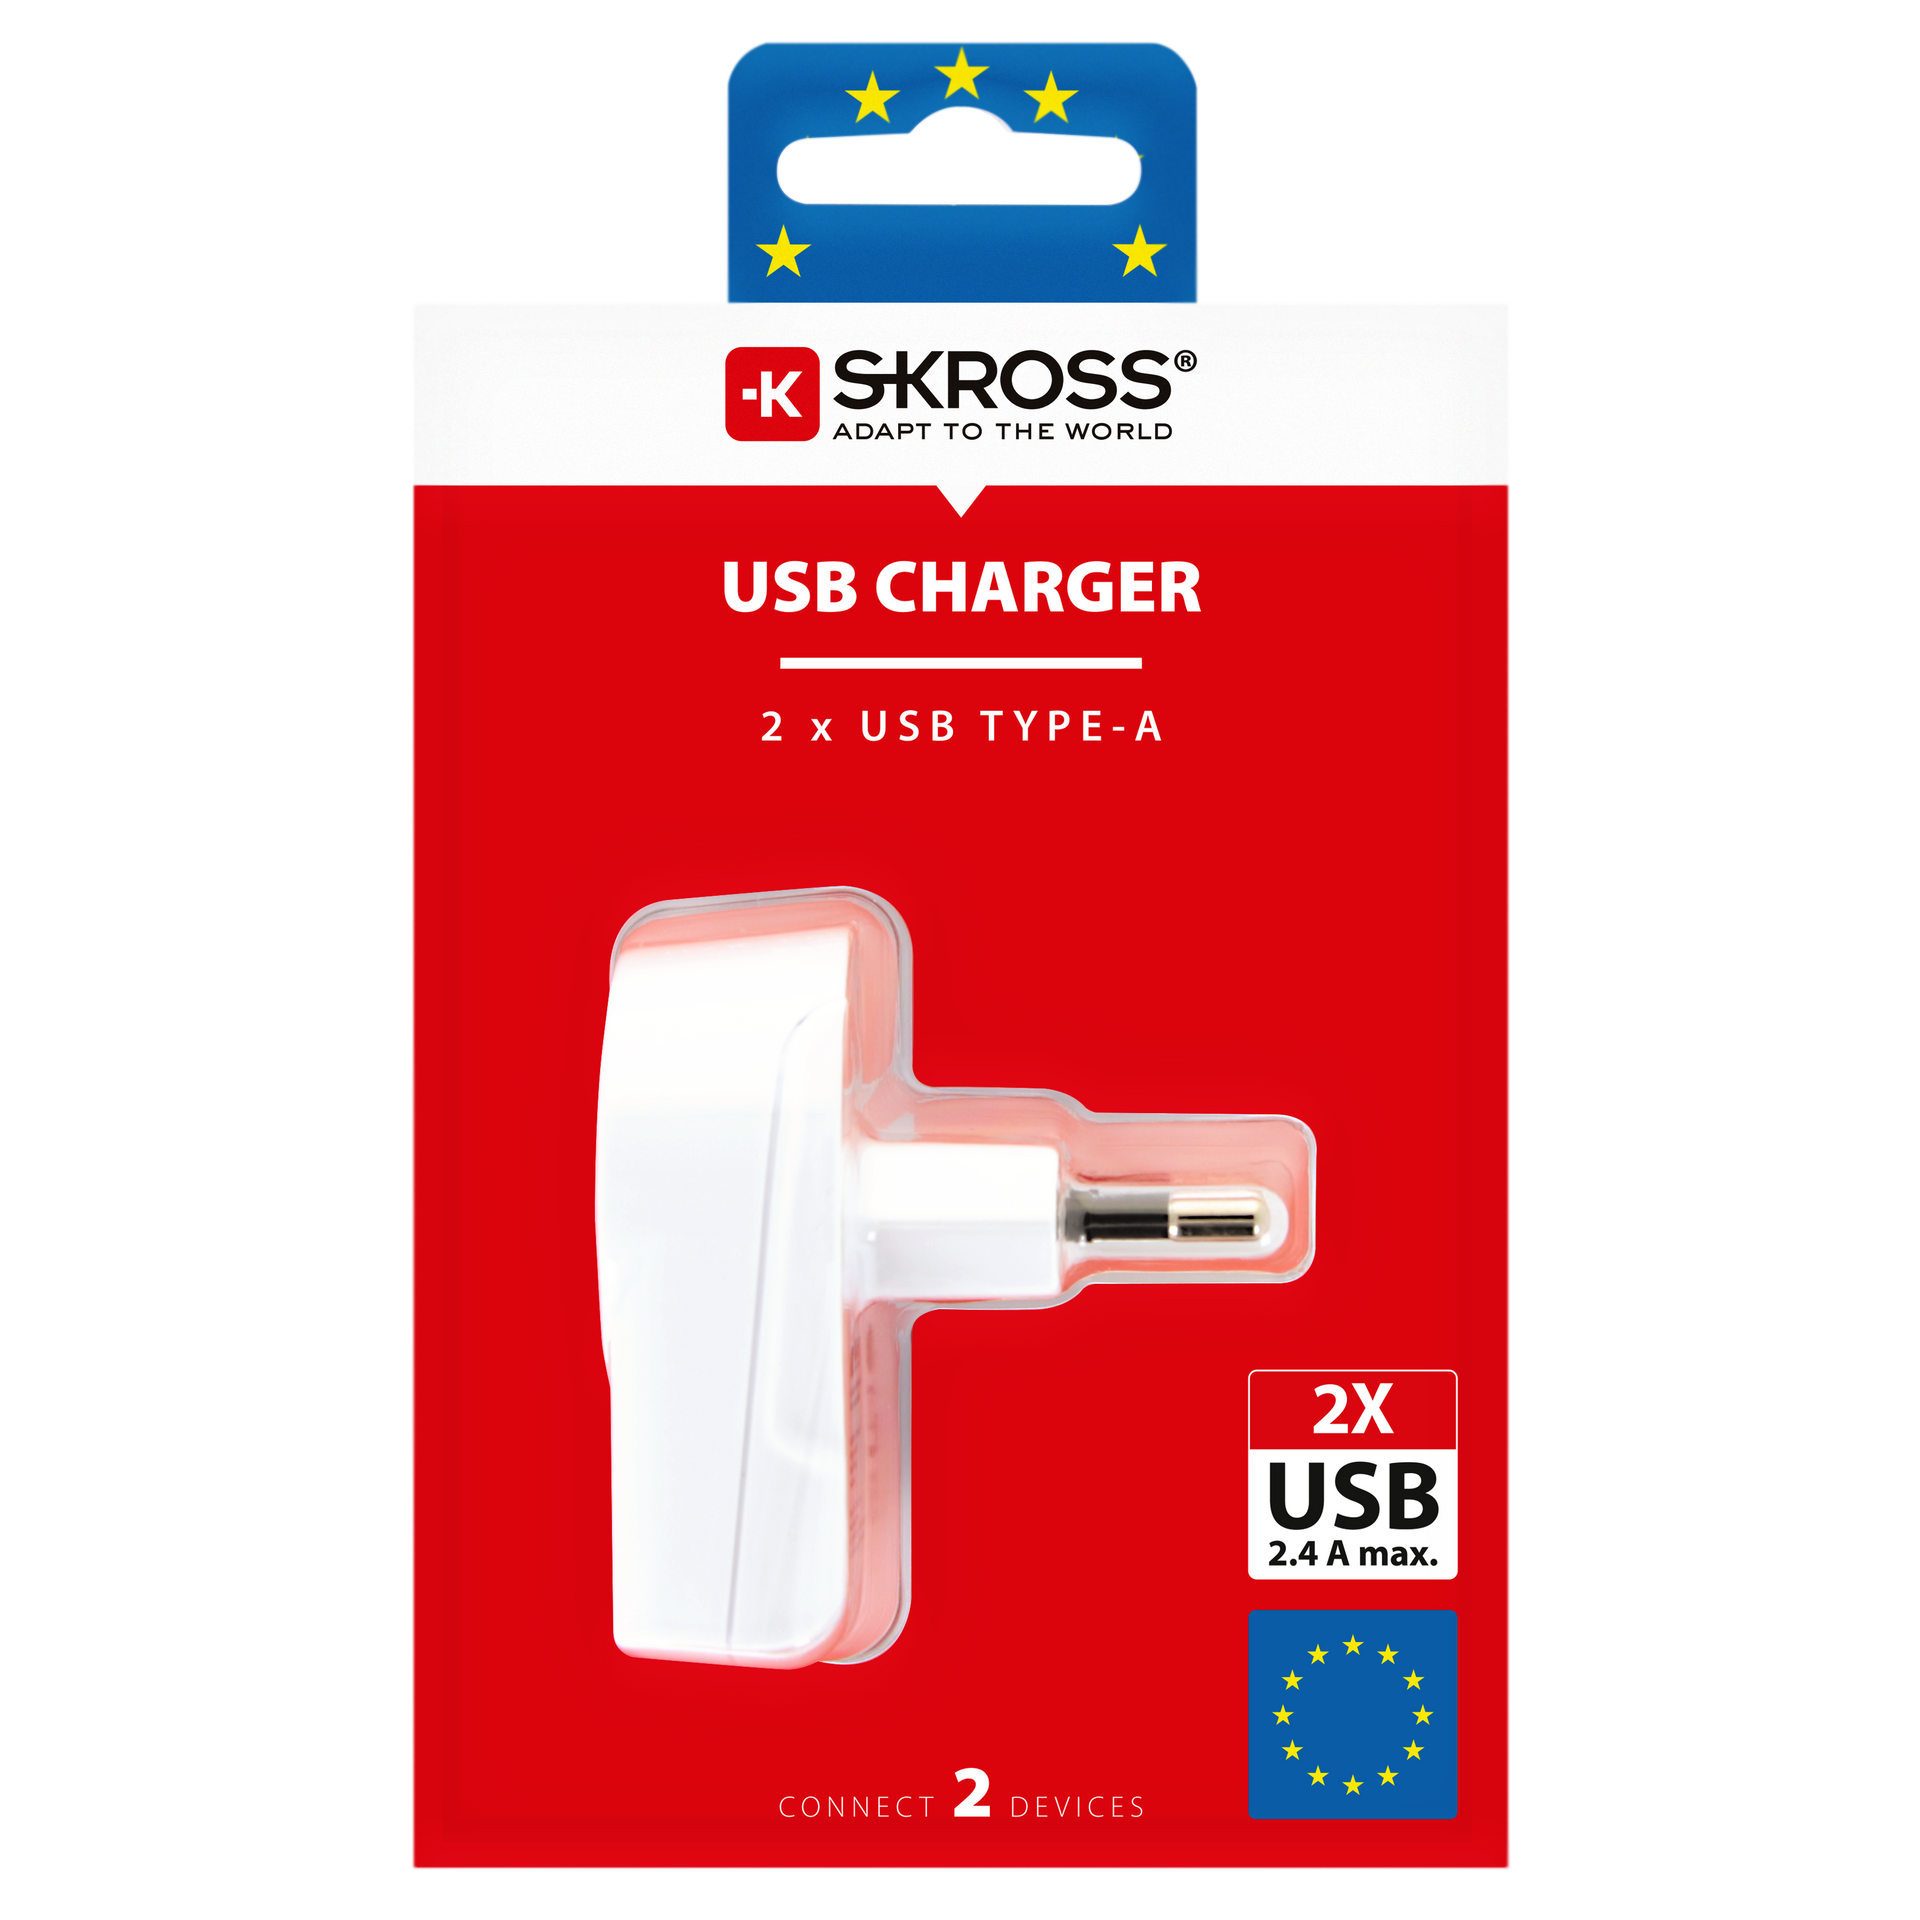 Skross USB Charger. Euro USB Charger (2xA) Packaging 